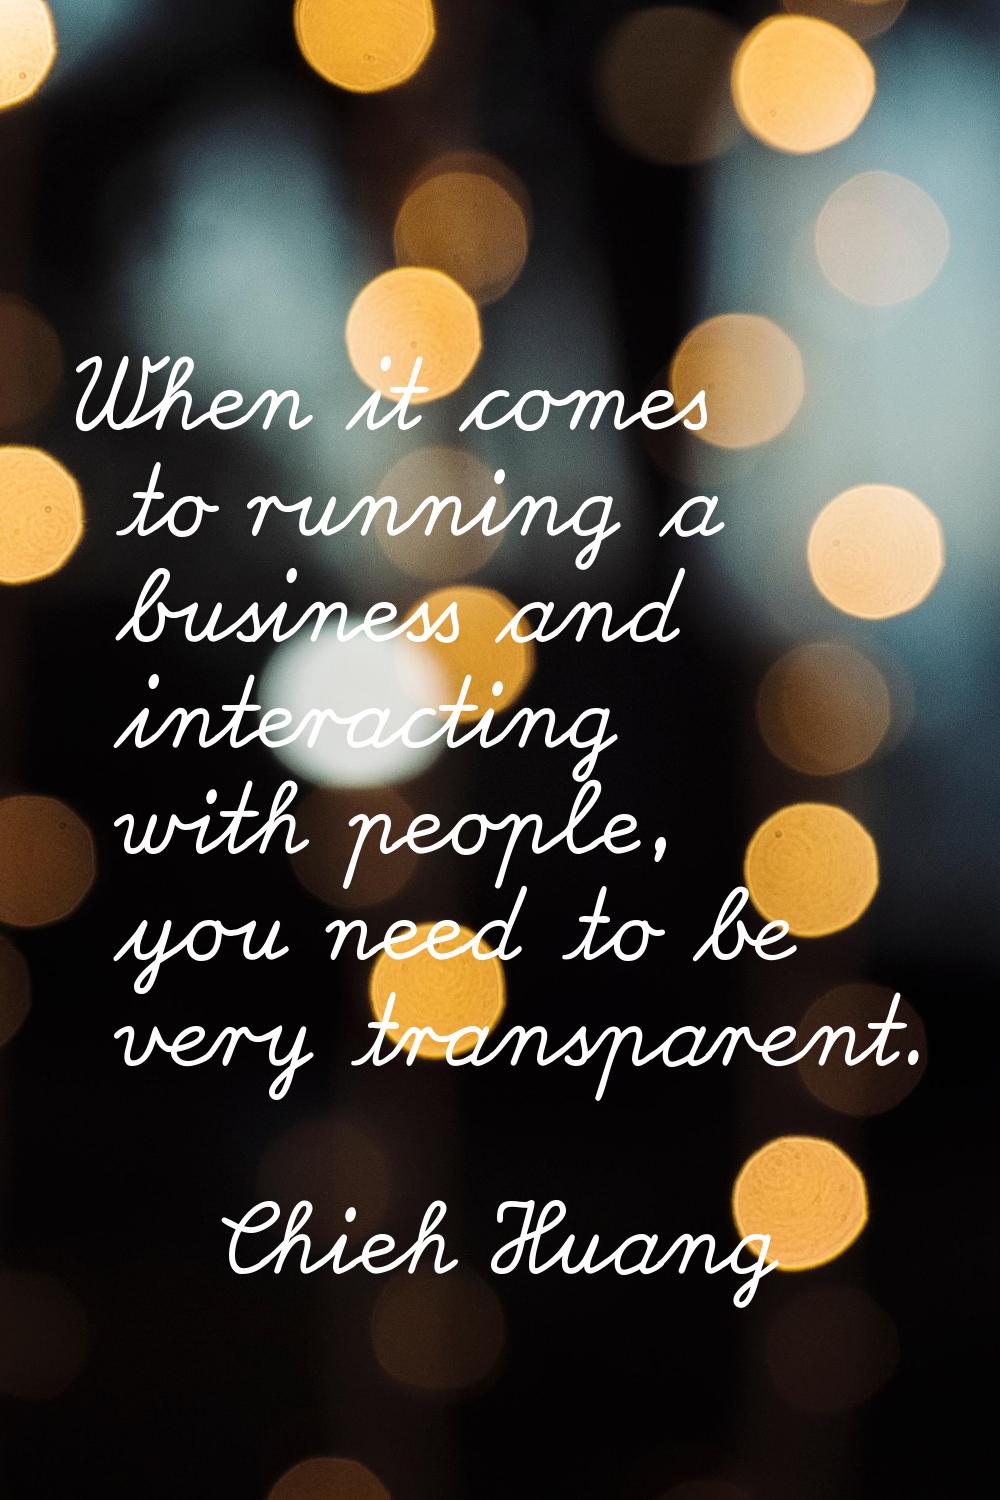 When it comes to running a business and interacting with people, you need to be very transparent.